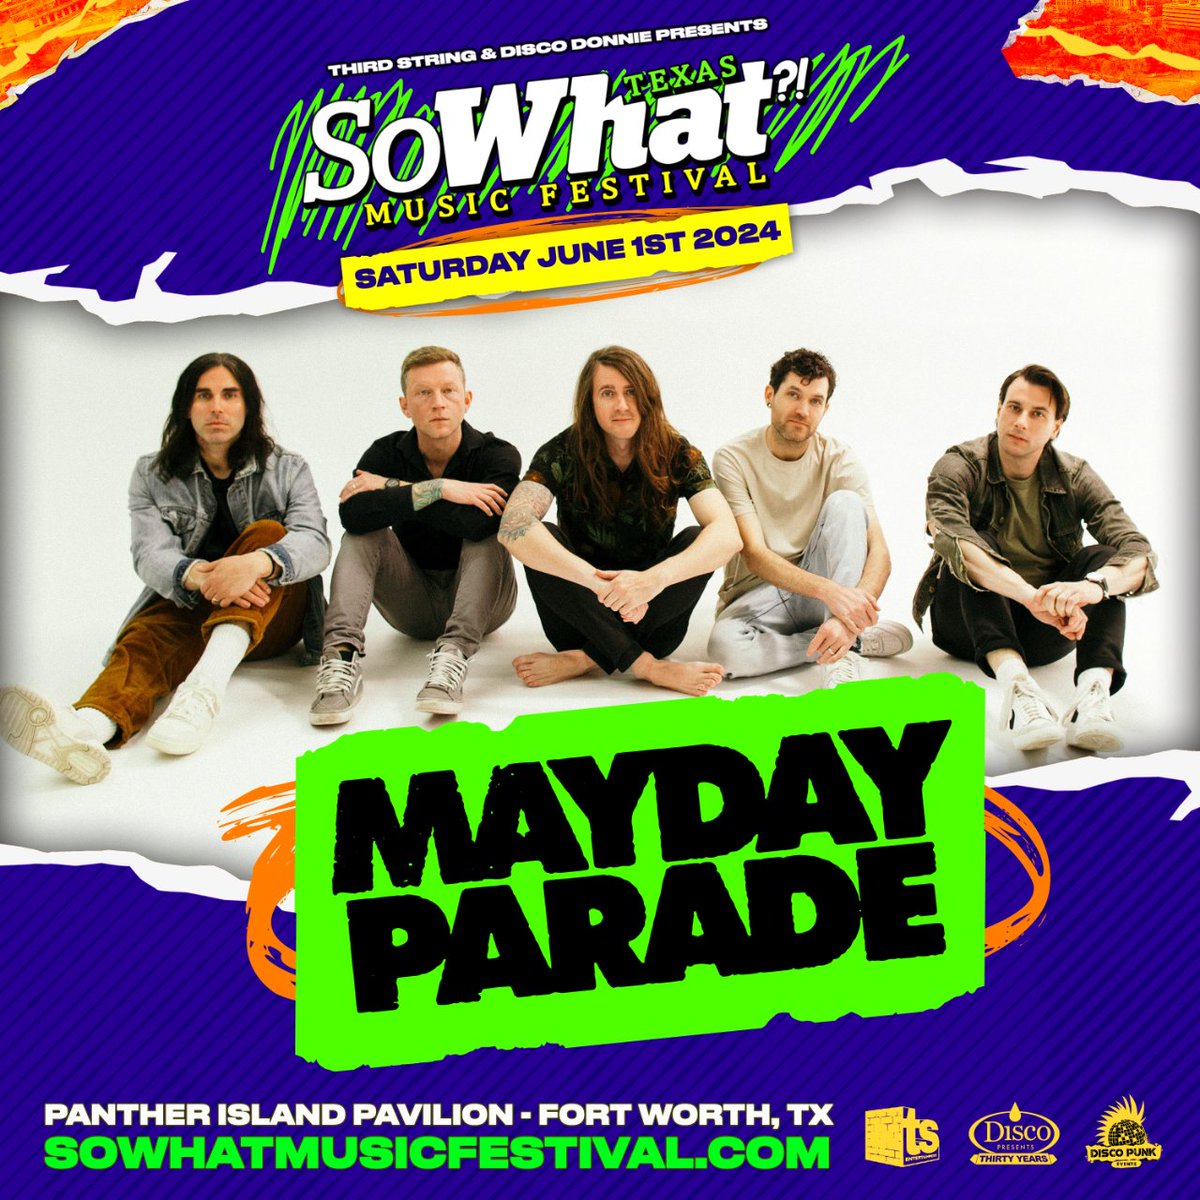 the sights and sounds were just the beginning ☀️ we can't wait to see @maydayparade take over Spike's Pit on June 1st! Who's gonna be singing along with us?!